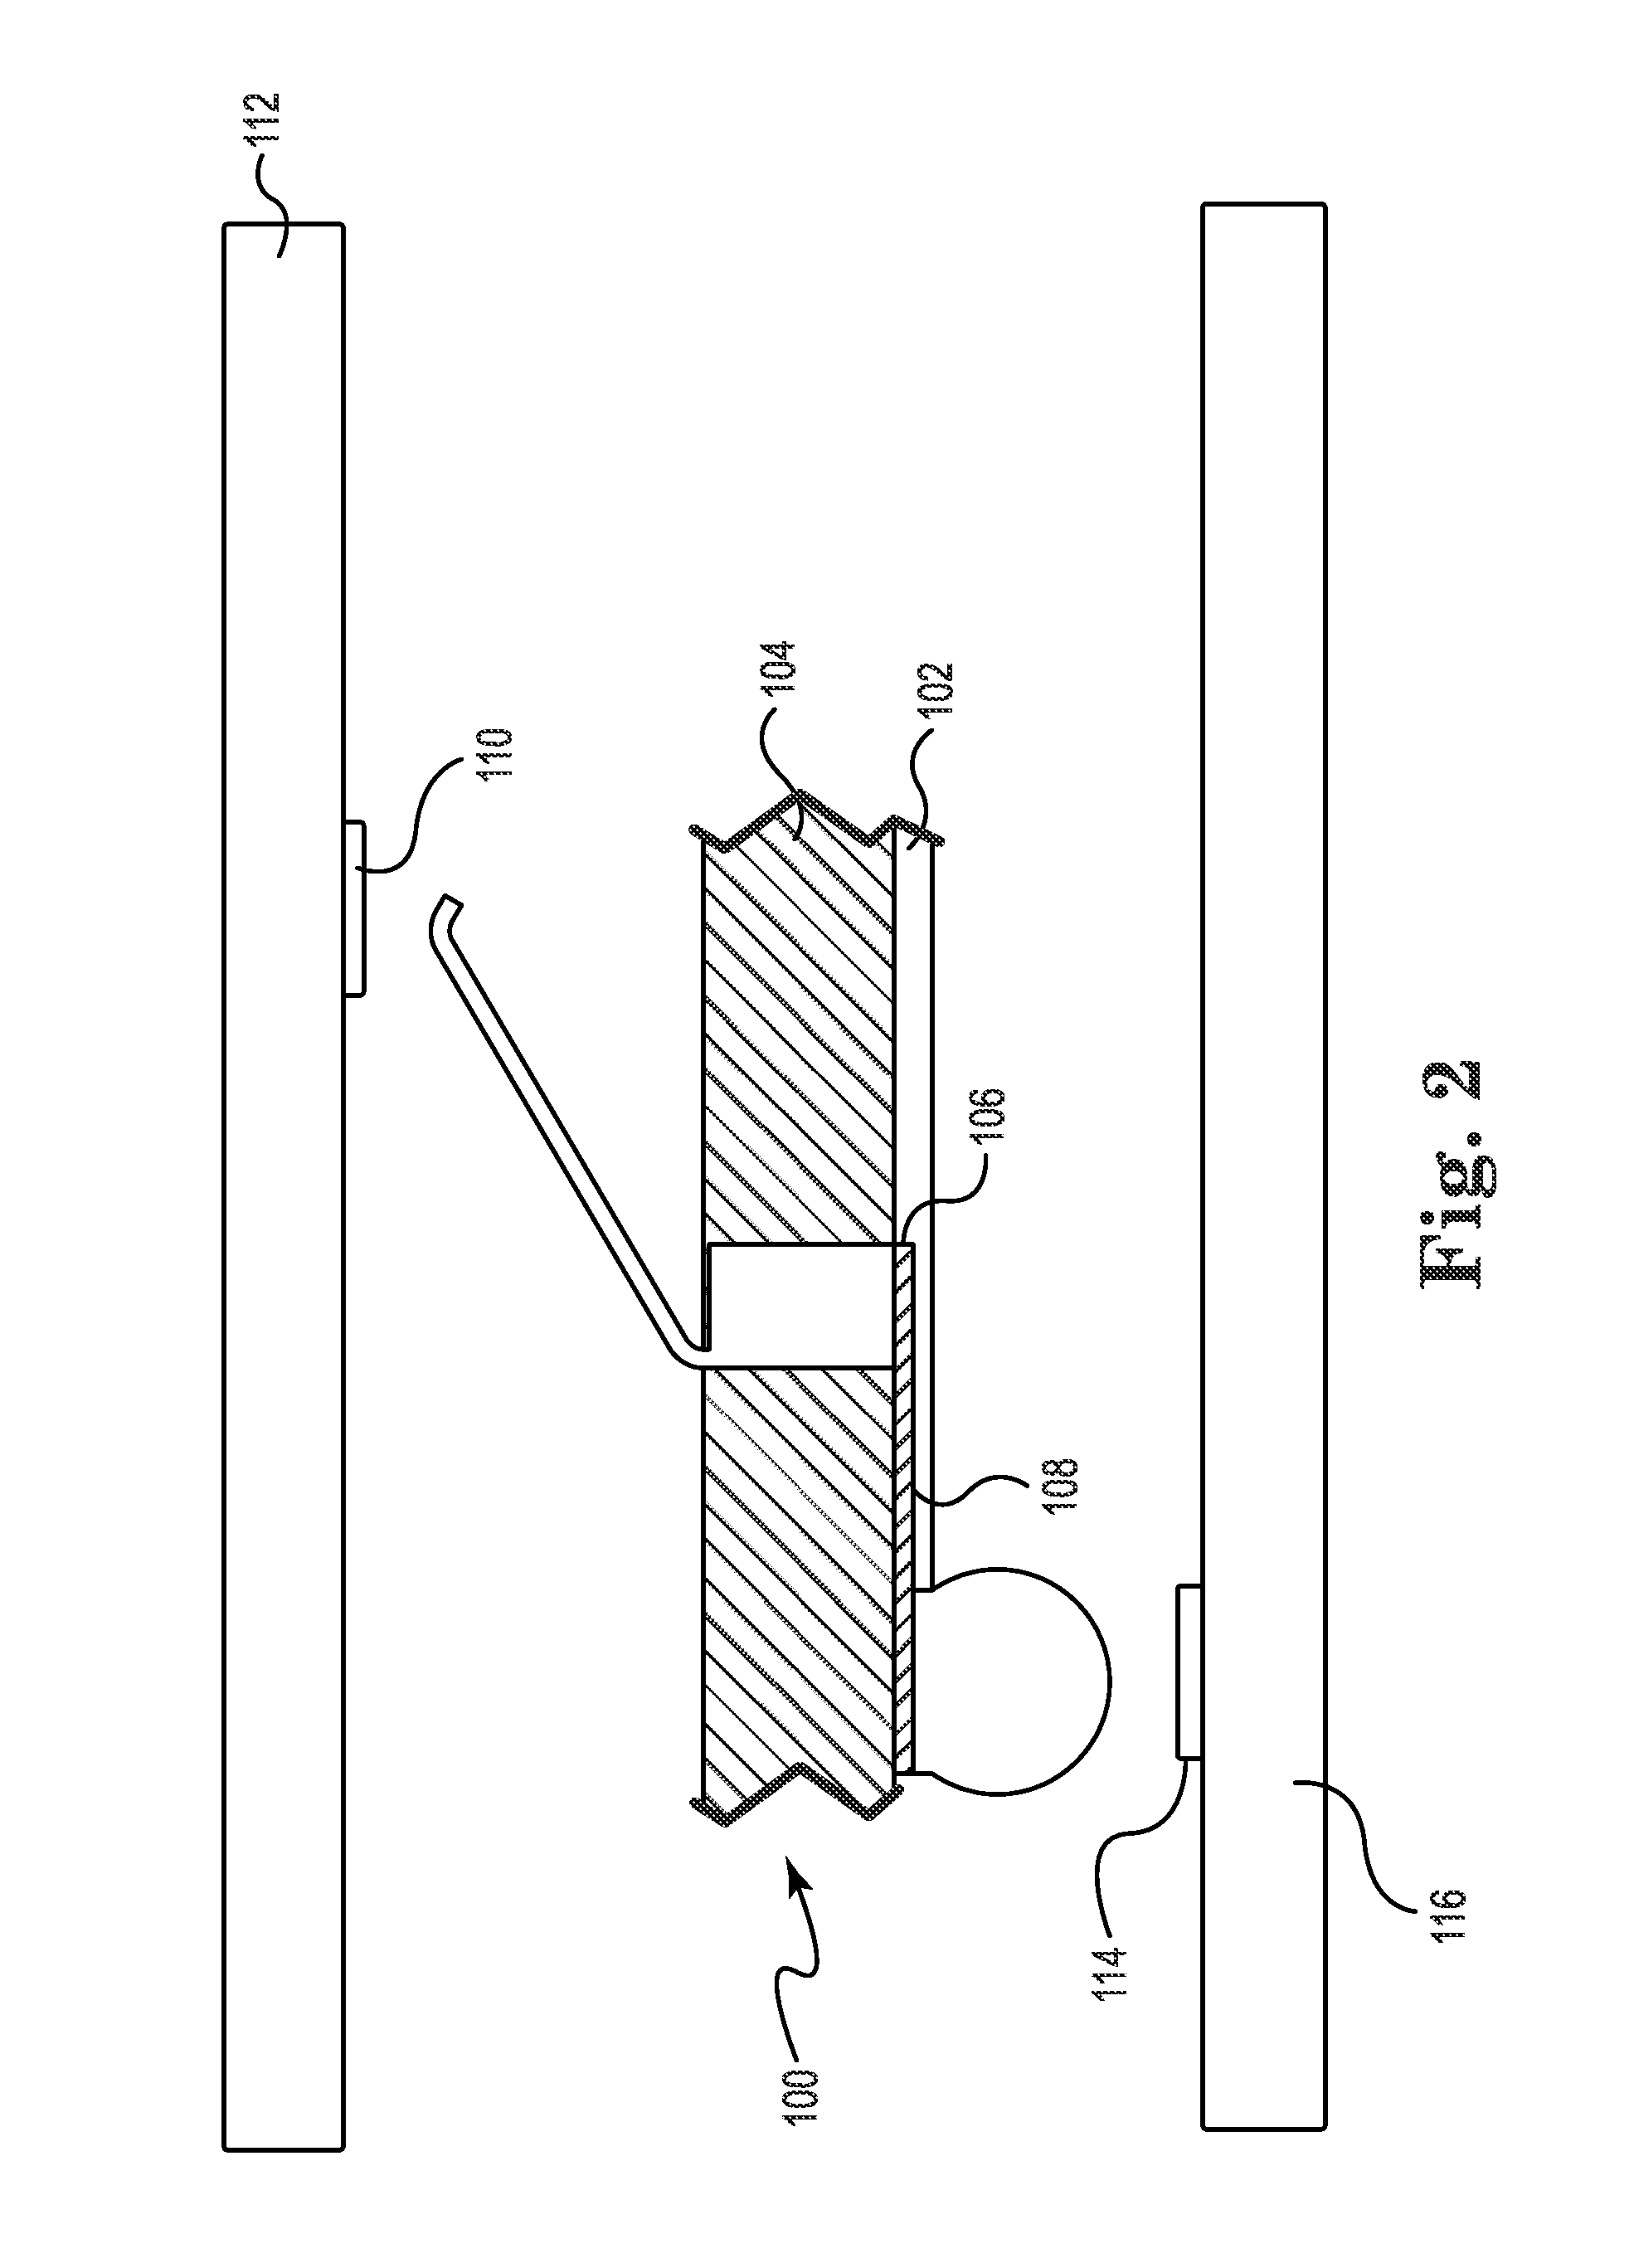 Semiconductor socket with direct selective metalization